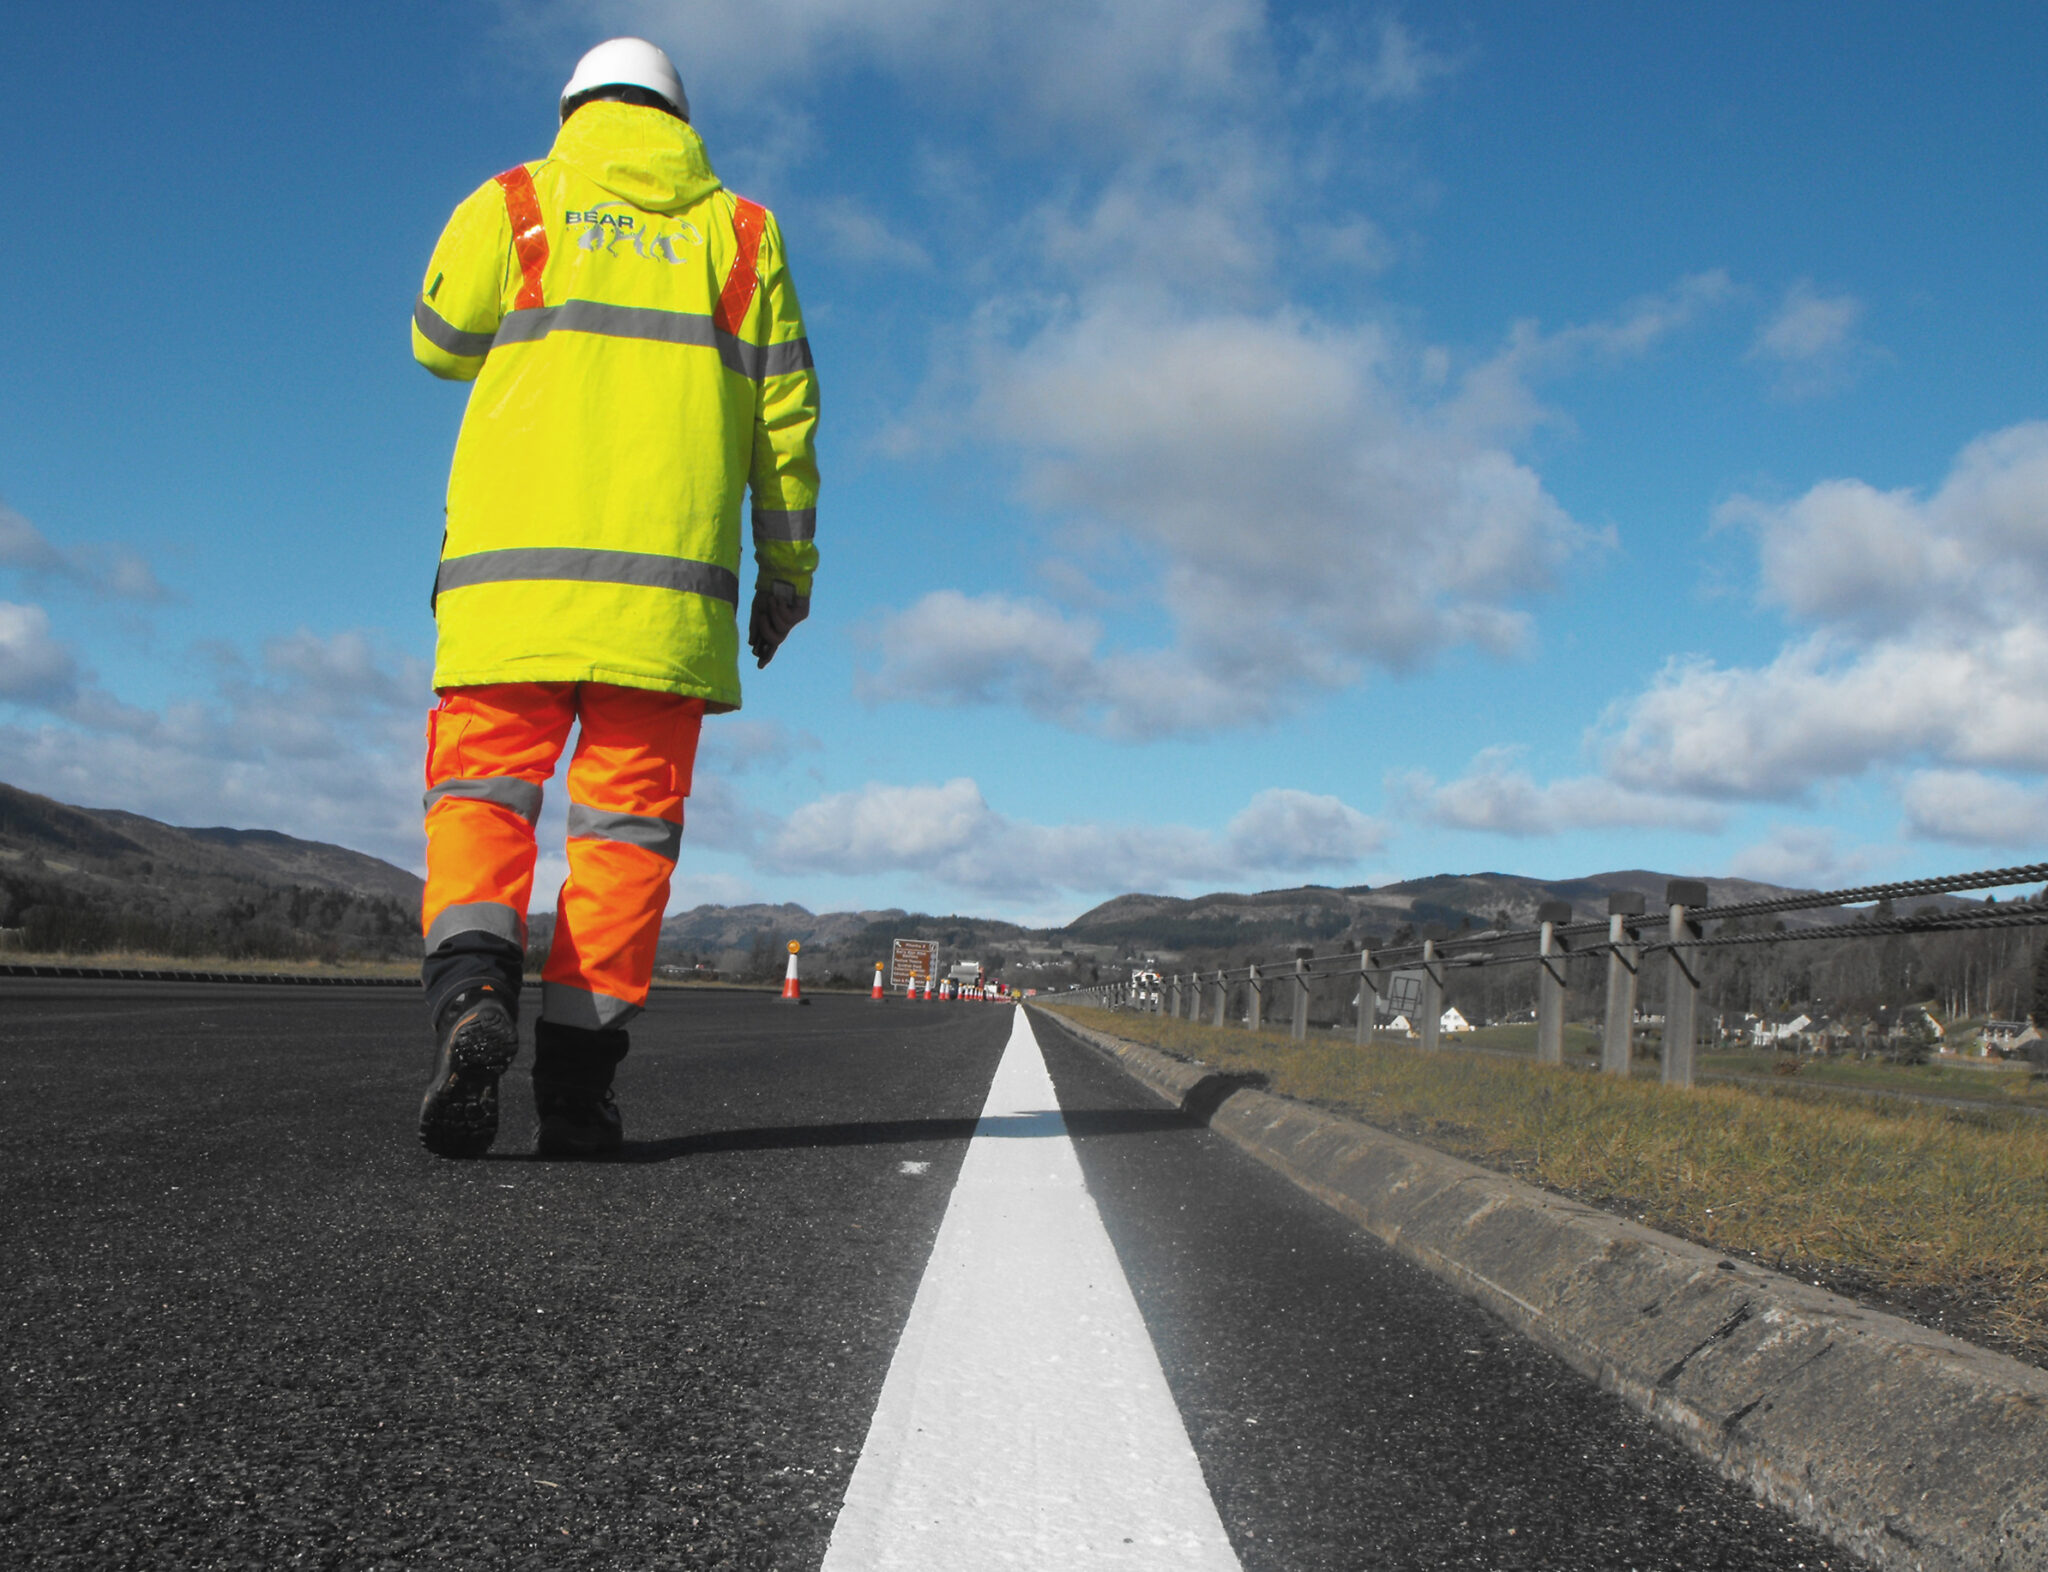 OVERNIGHT SURFACING IMPROVEMENTS PLANNED FOR FIVE LOCATIONS ON A82 BETWEEN BALLOCH AND TARBET